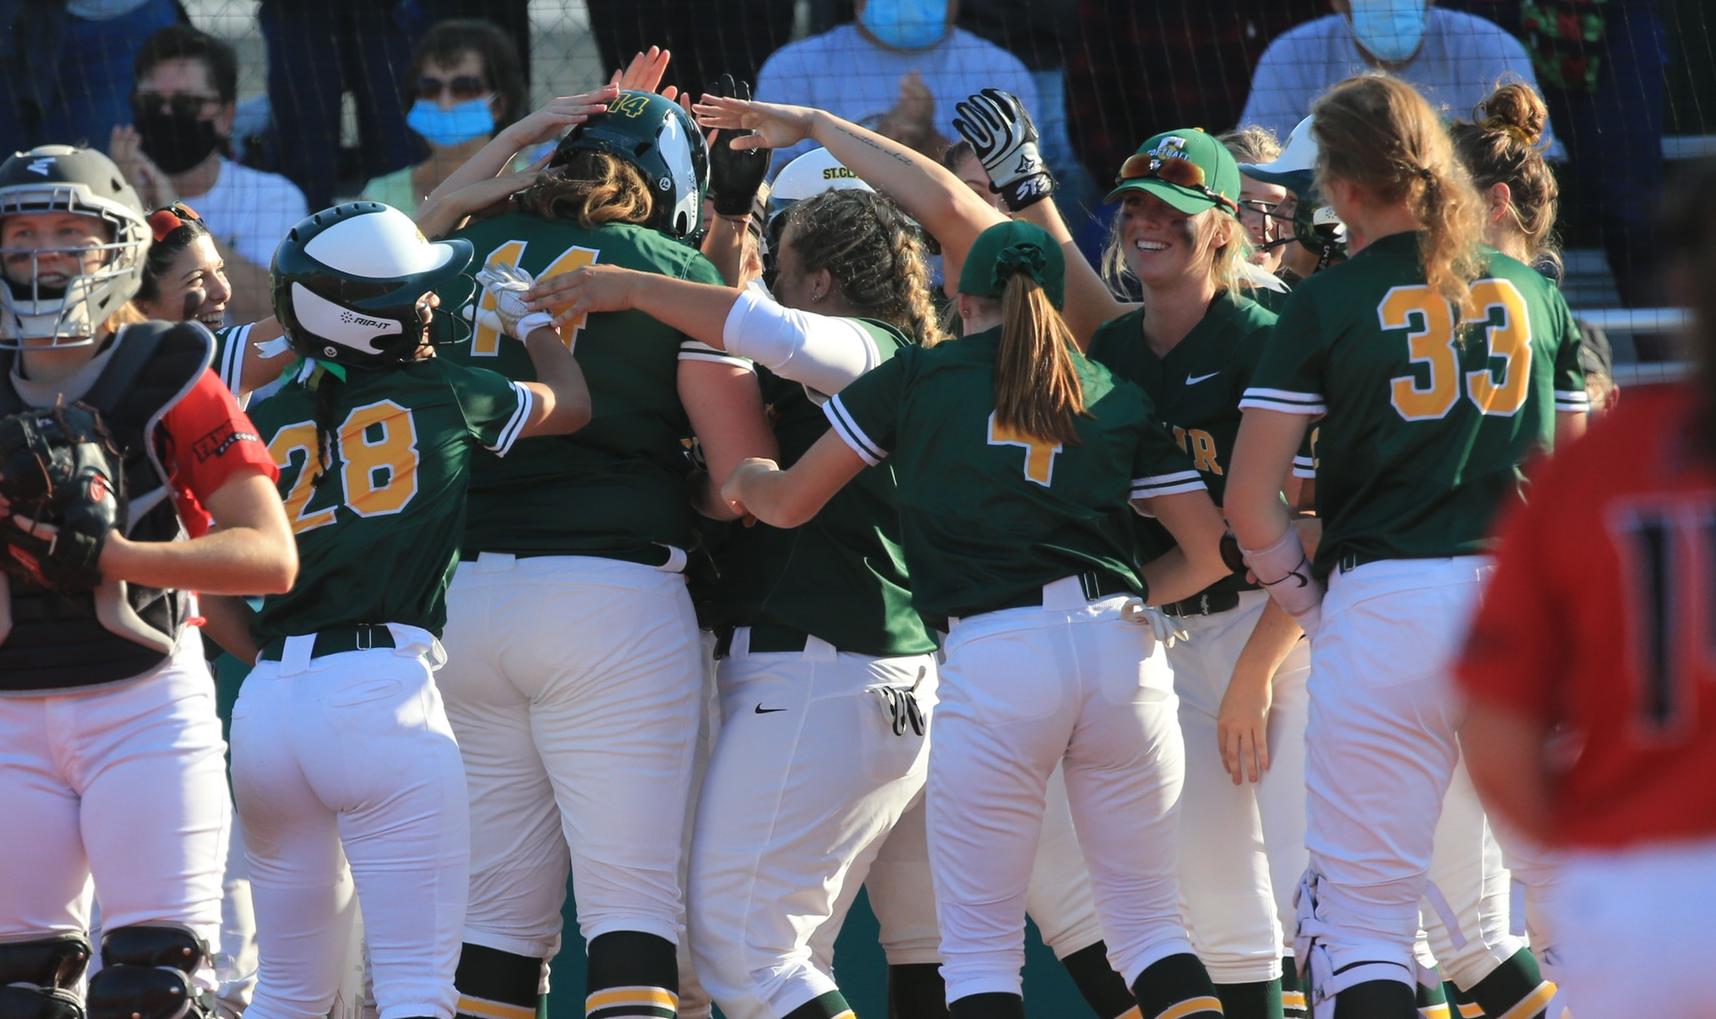 St. Clair College Women's Softball Ready for Nationals